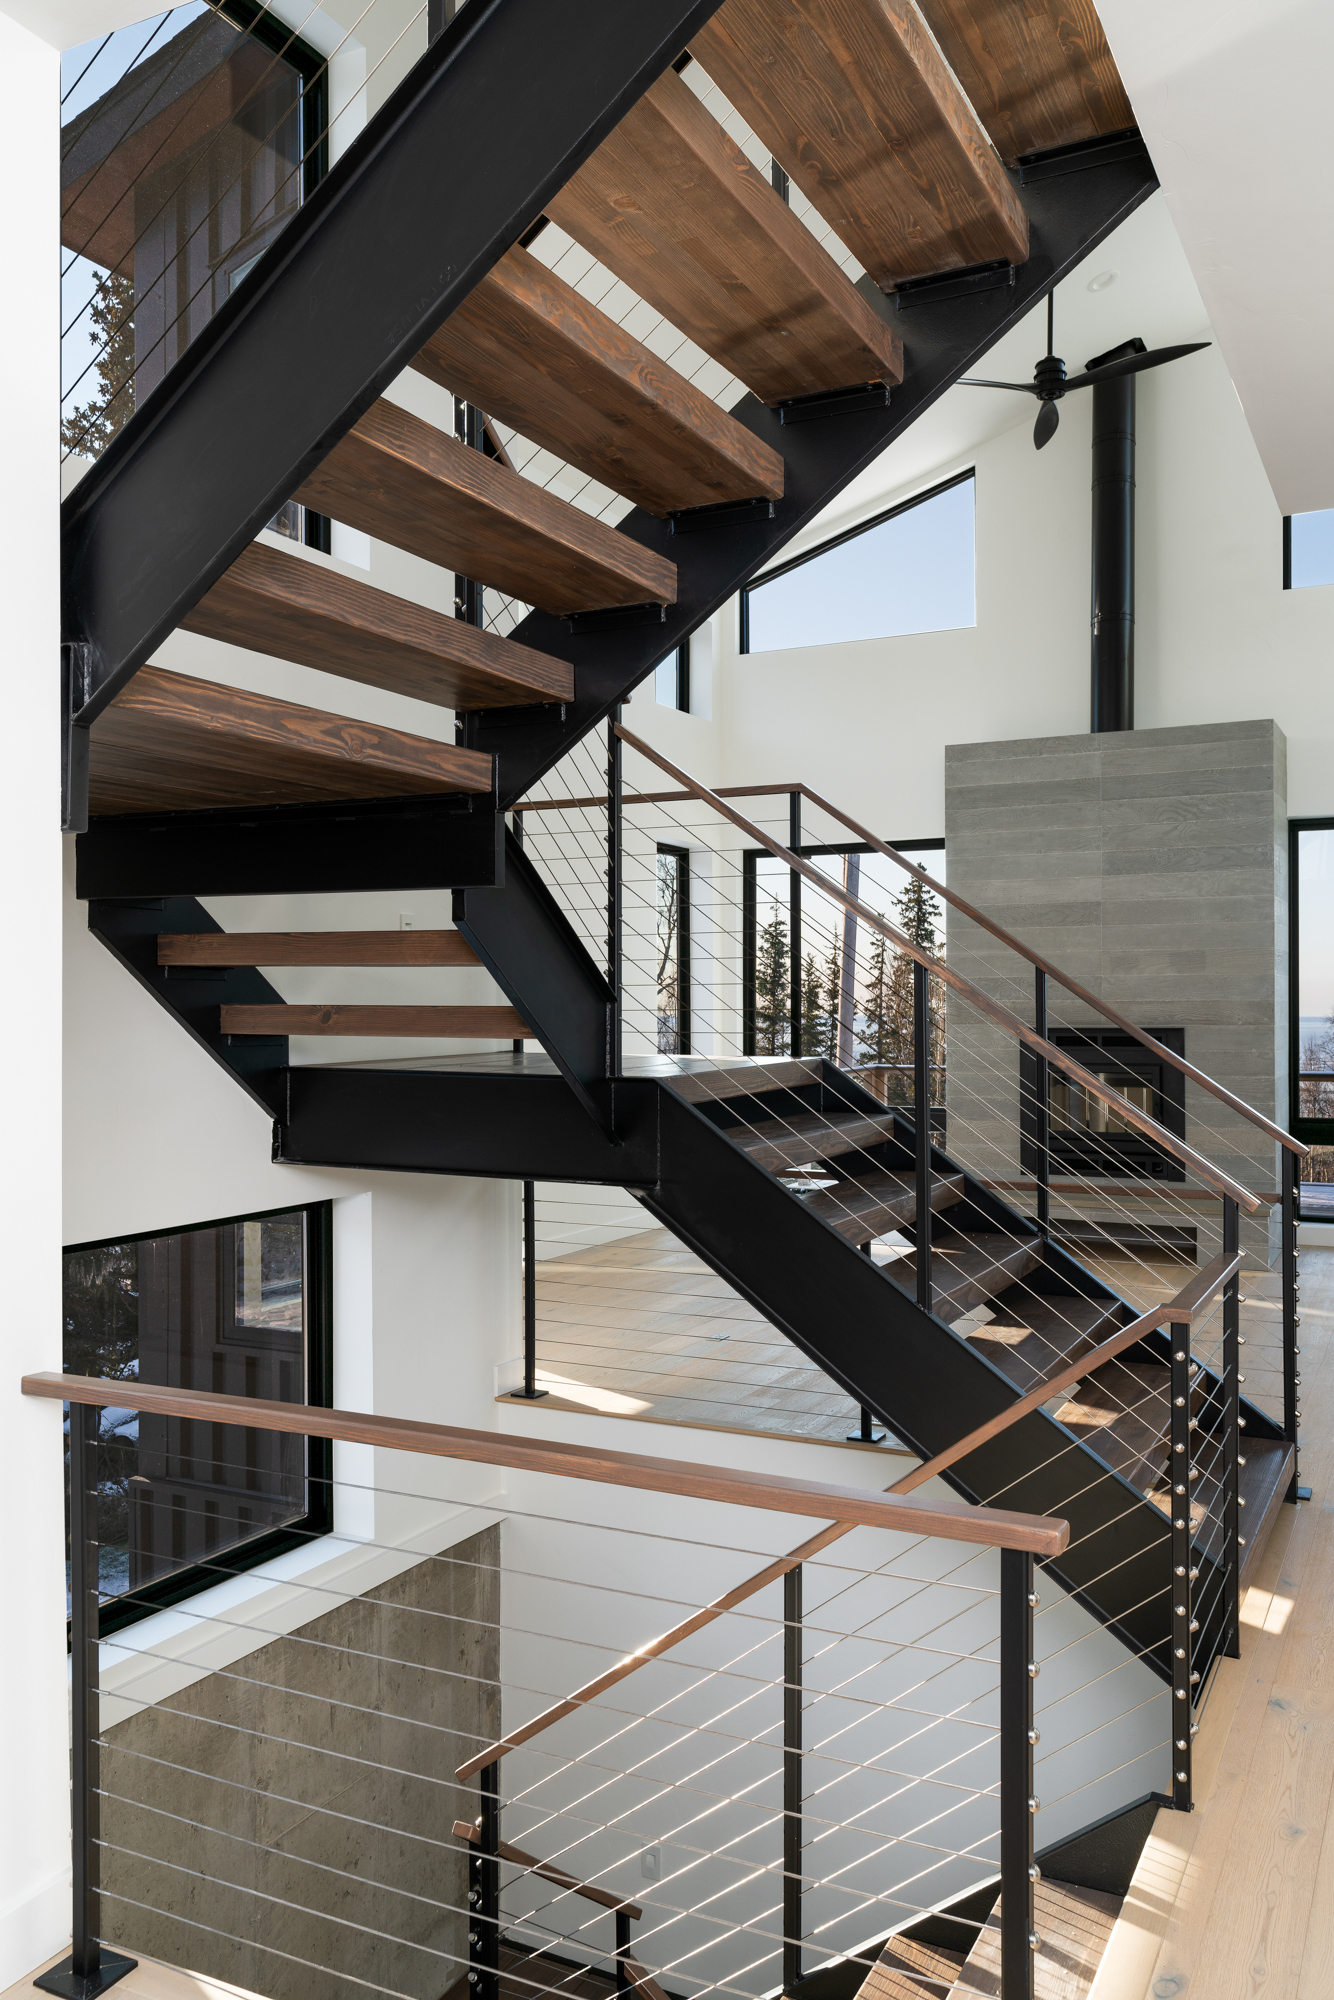 The image features a modern staircase within a spacious, well-lit area, characterized by:

Dark Metal Frames: Providing a sleek contrast to the light surroundings.
Wooden Steps: Adding a warm, natural touch to the design.
Cable Railings: Offering safety while maintaining an open feel.
Large Window: Allowing natural light to enhance the space.
White Walls: Complementing the staircase and contributing to the room’s brightness.
Ceiling Fan: Indicating a multi-level building structure.